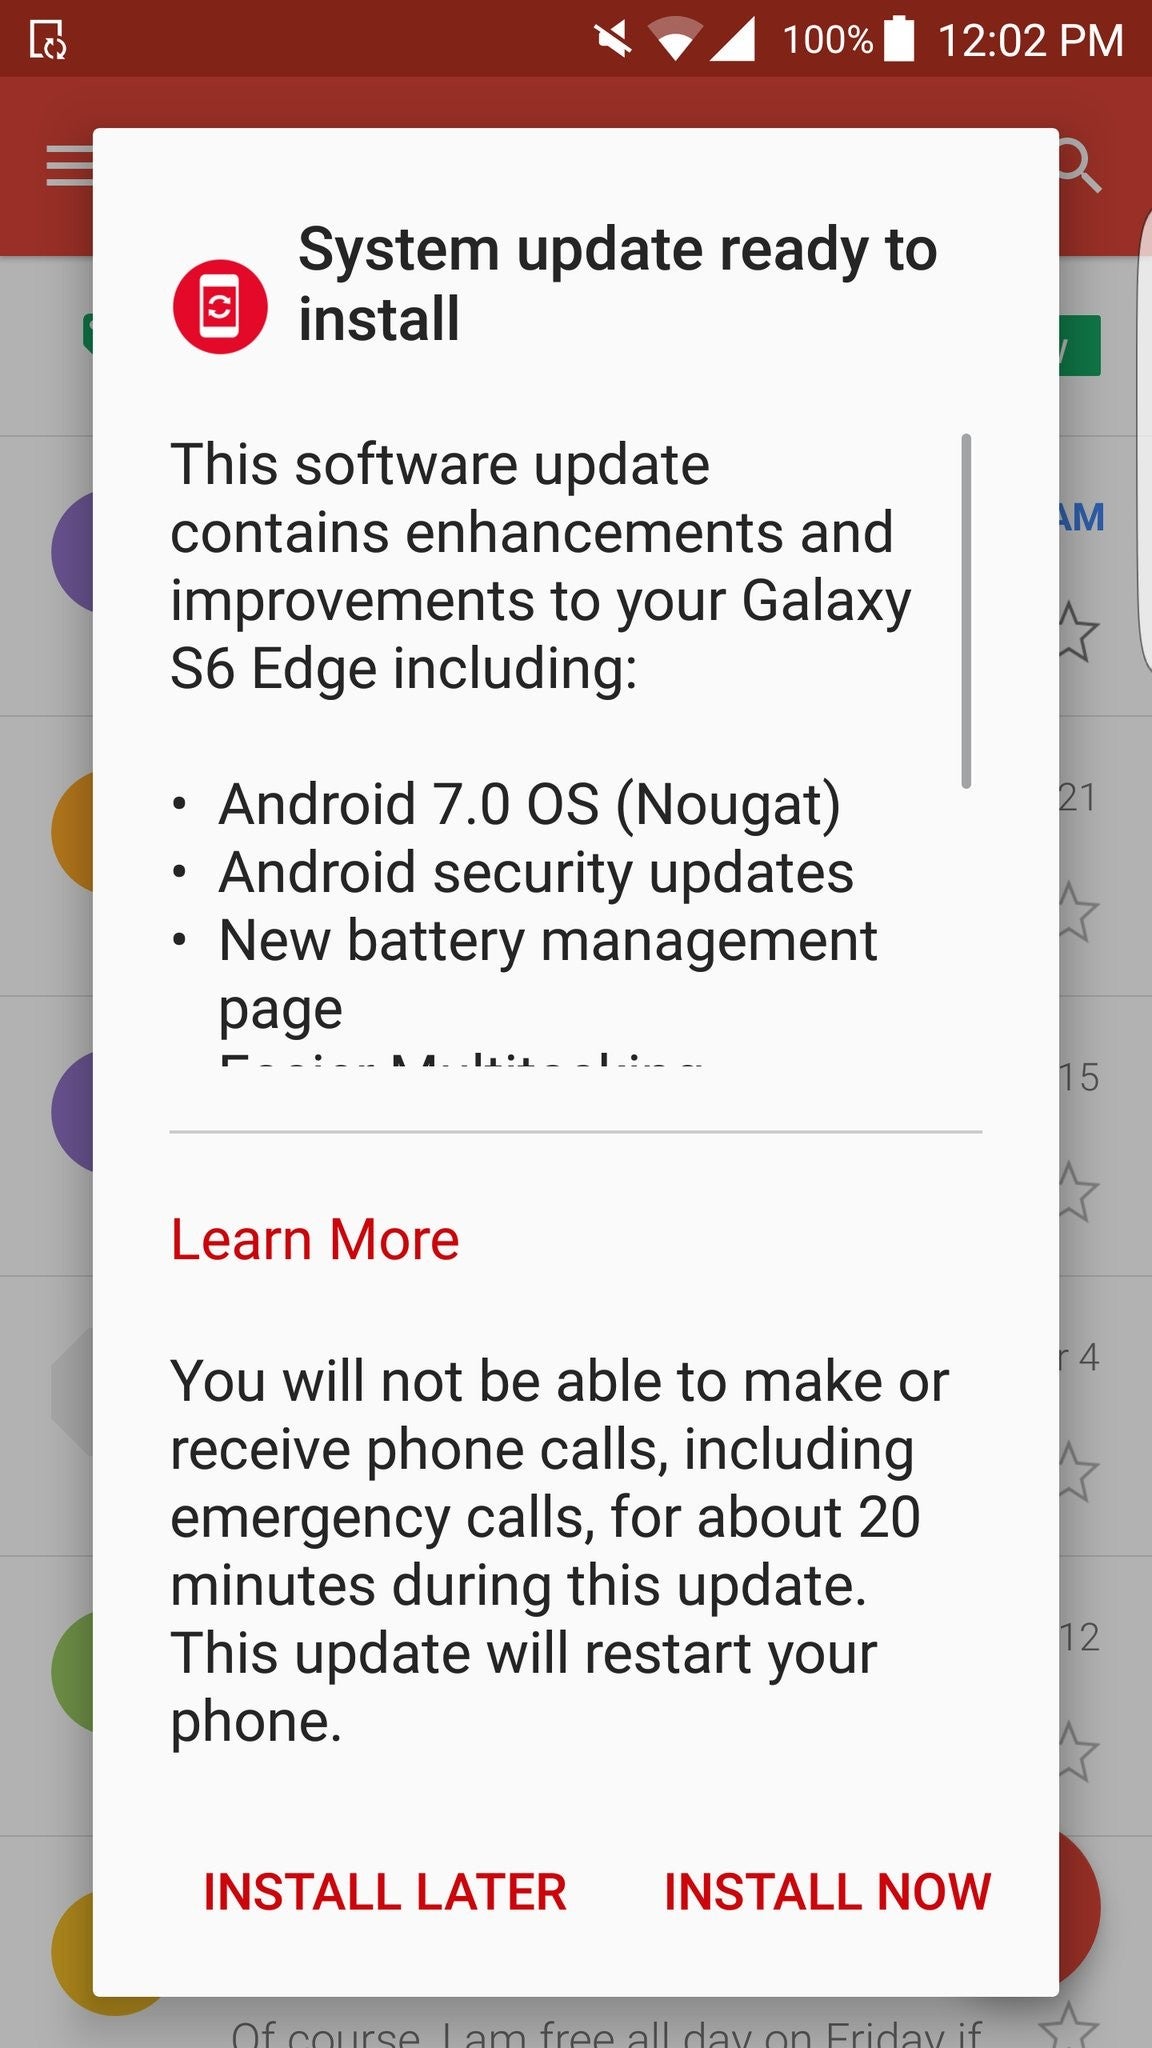 Verizon starts seeding Android 7.0 Nougat for Samsung Galaxy S6 and S6 edge